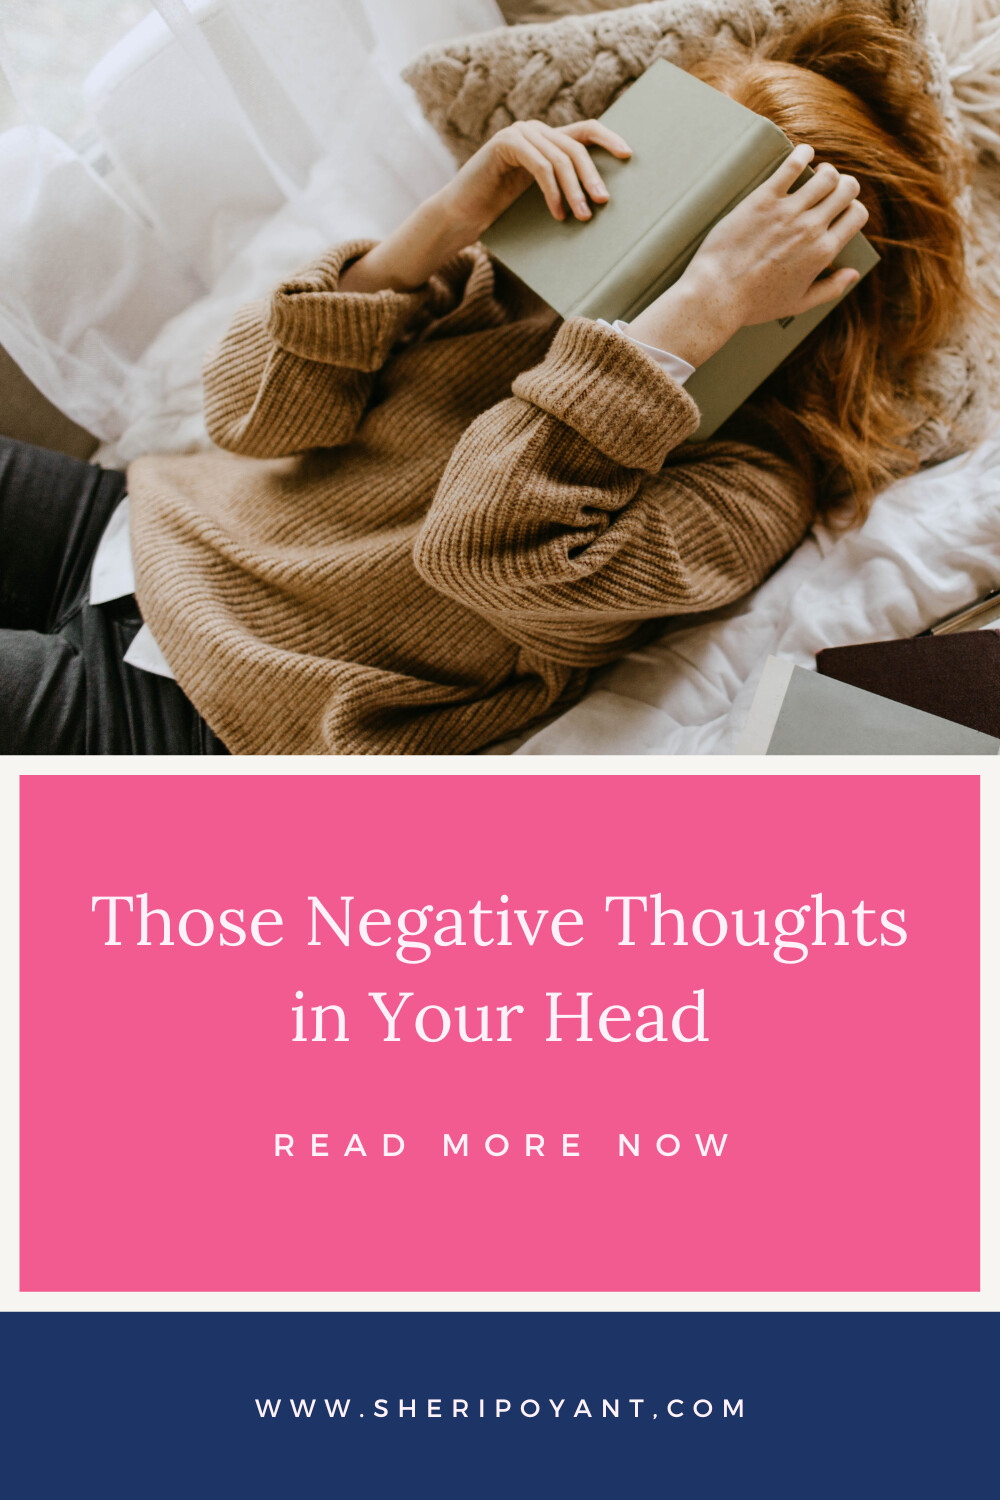 Those Negative Thoughts in Your Head